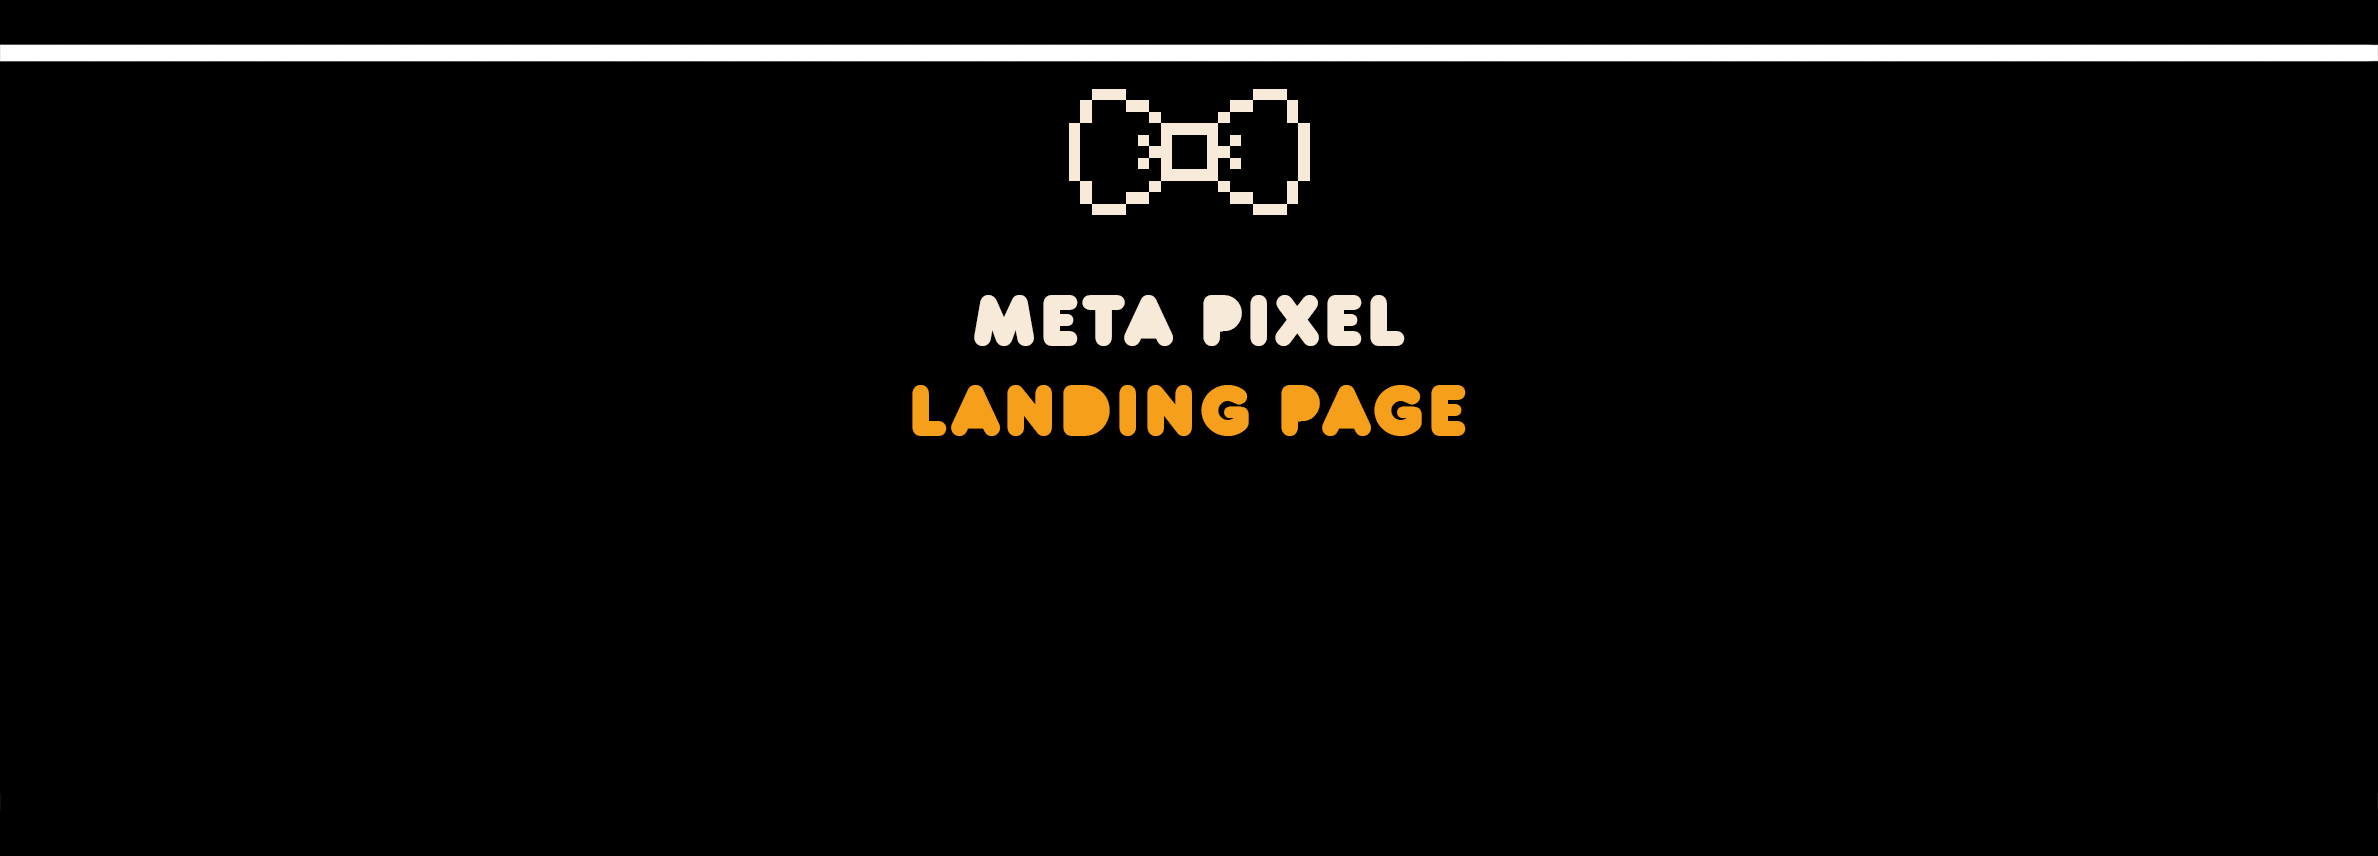 Article cover image for "How to setup the Facebook Pixel for Landing Pages"